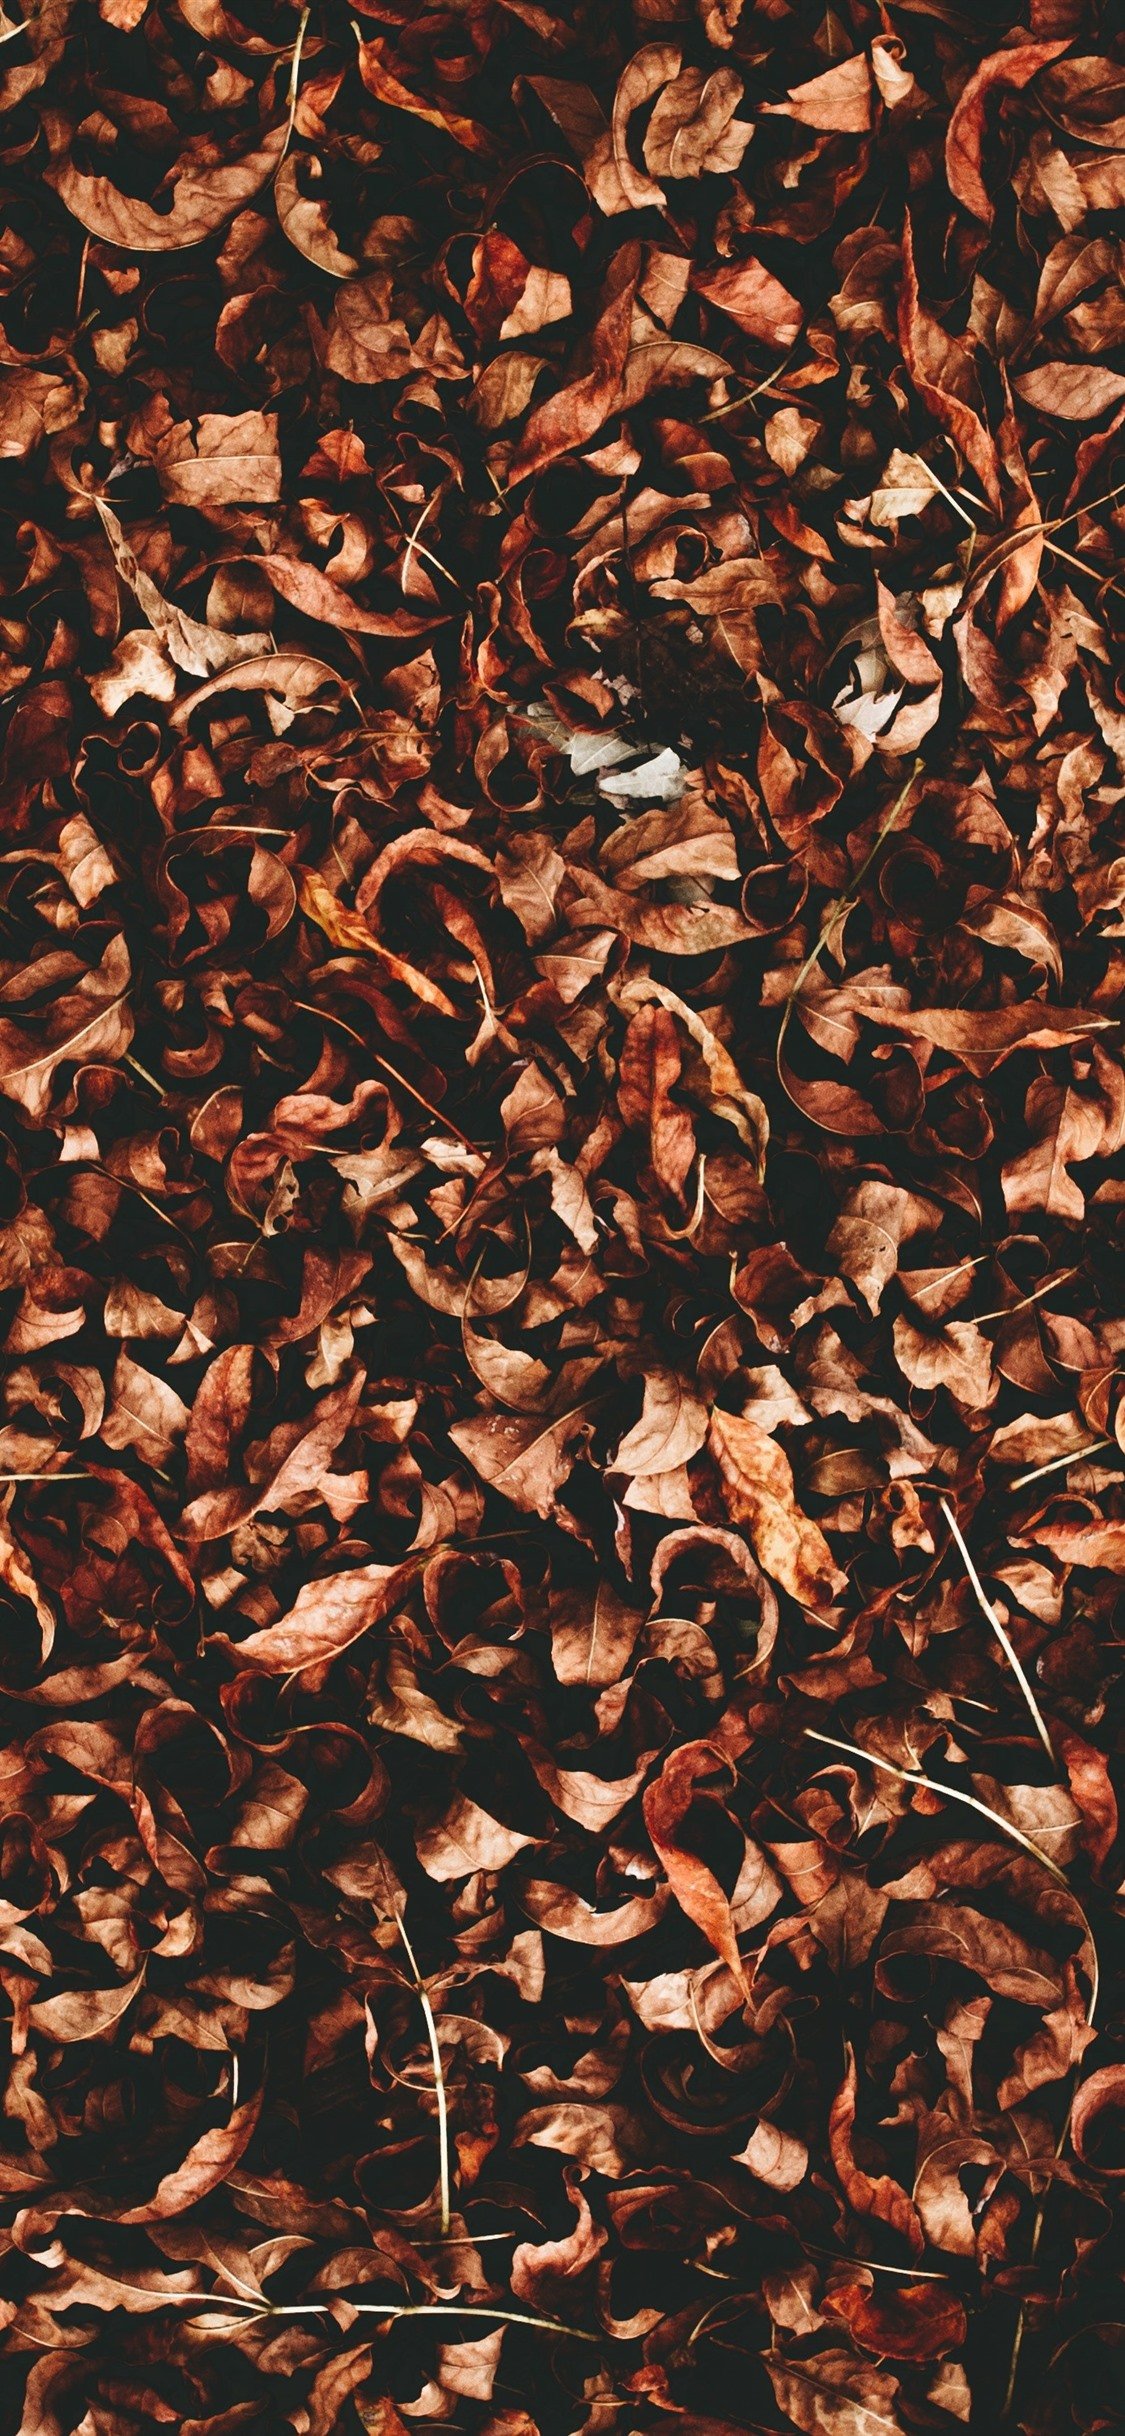 Many Dry Leaves, Autumn 1242x2688 IPhone 11 Pro XS Max Wallpaper, Background, Picture, Image